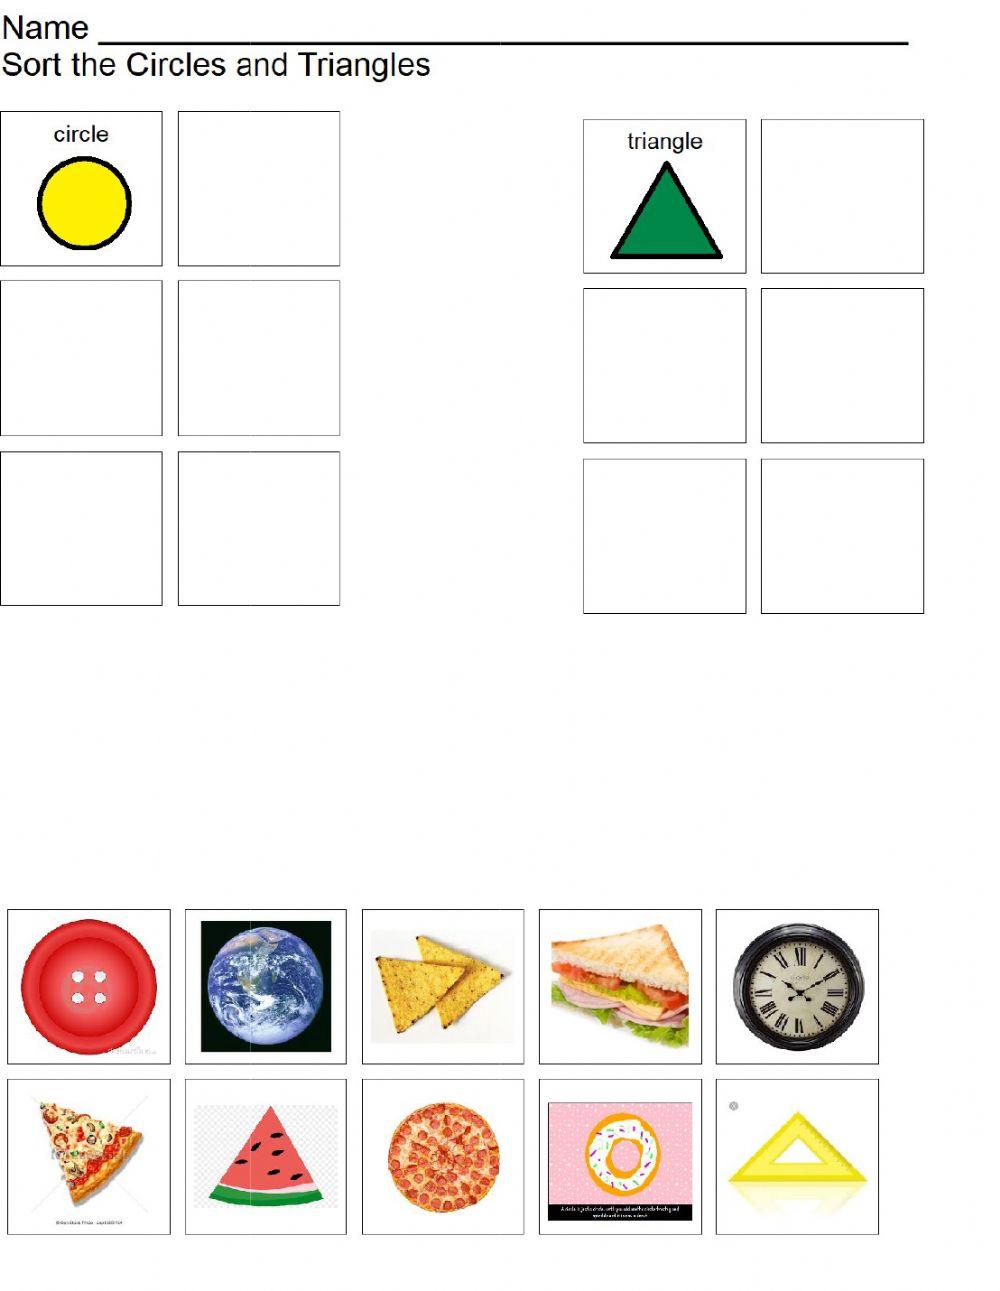 Circle and Triangle Sort